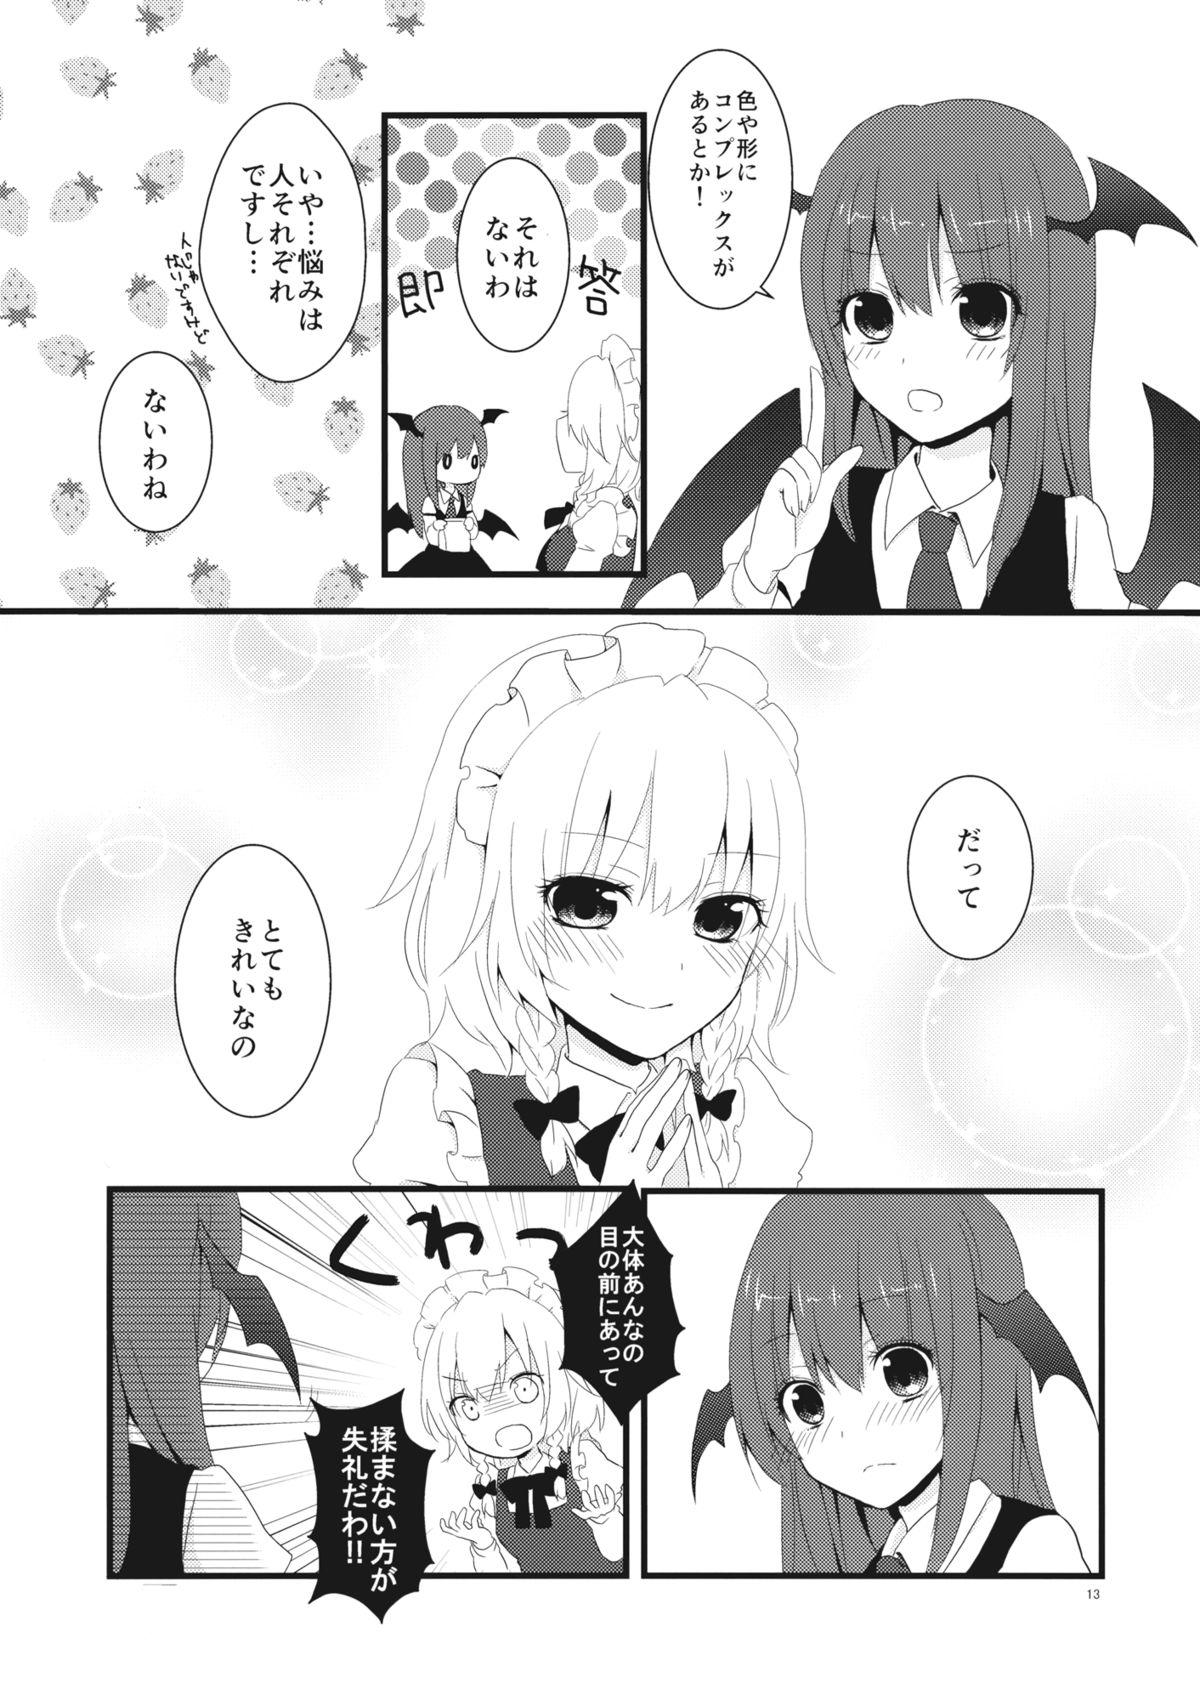 Lesbos marshmallow heart - Touhou project Family - Page 12